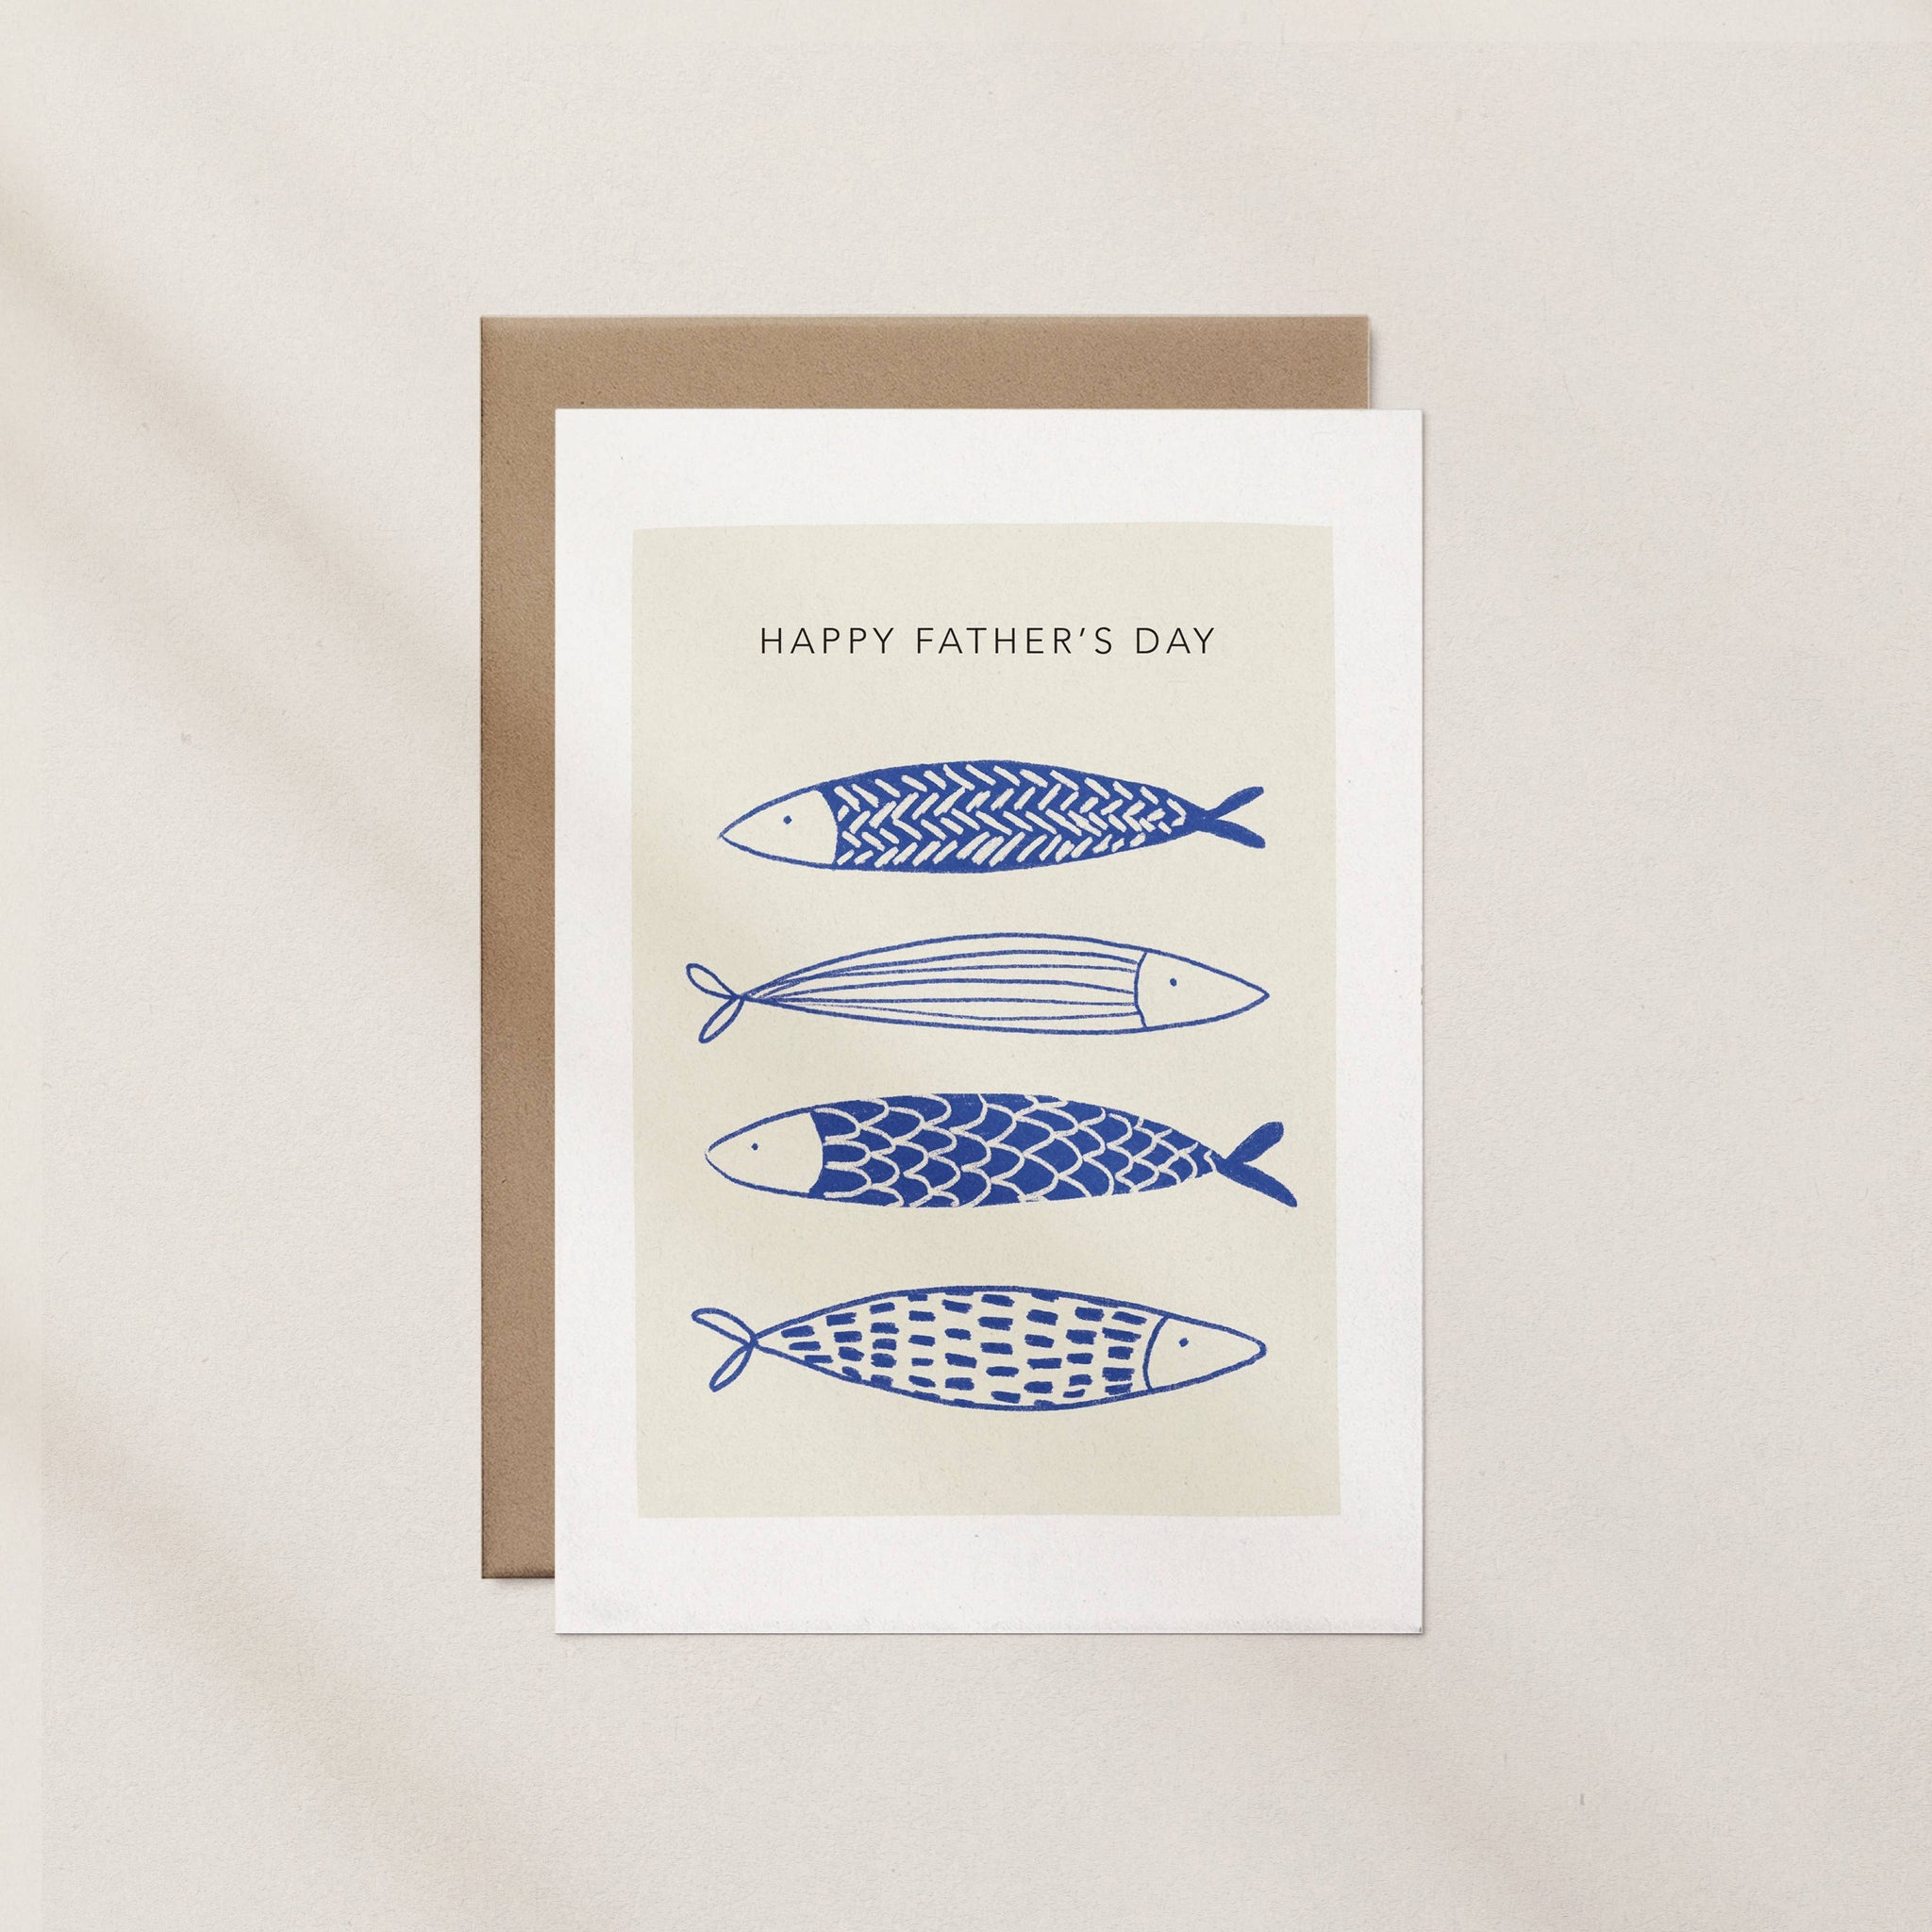 Nat Creative - Happy Father's Day Fish Blue